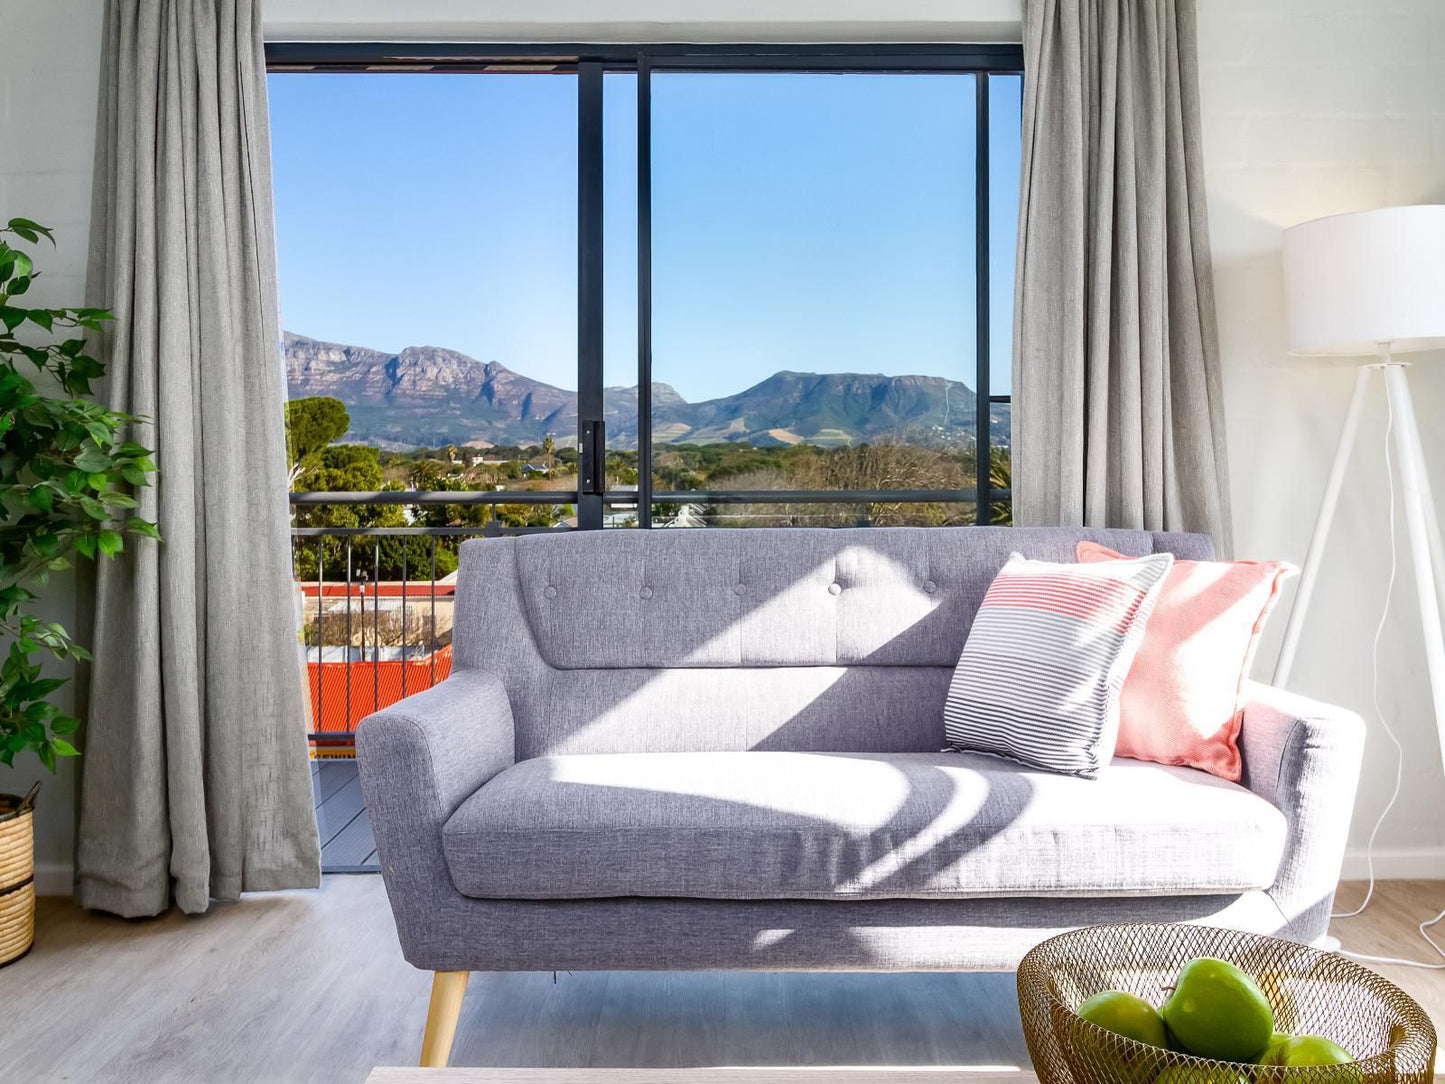 Wink Eaton Square Diep River Cape Town Western Cape South Africa Mountain, Nature, Bedroom